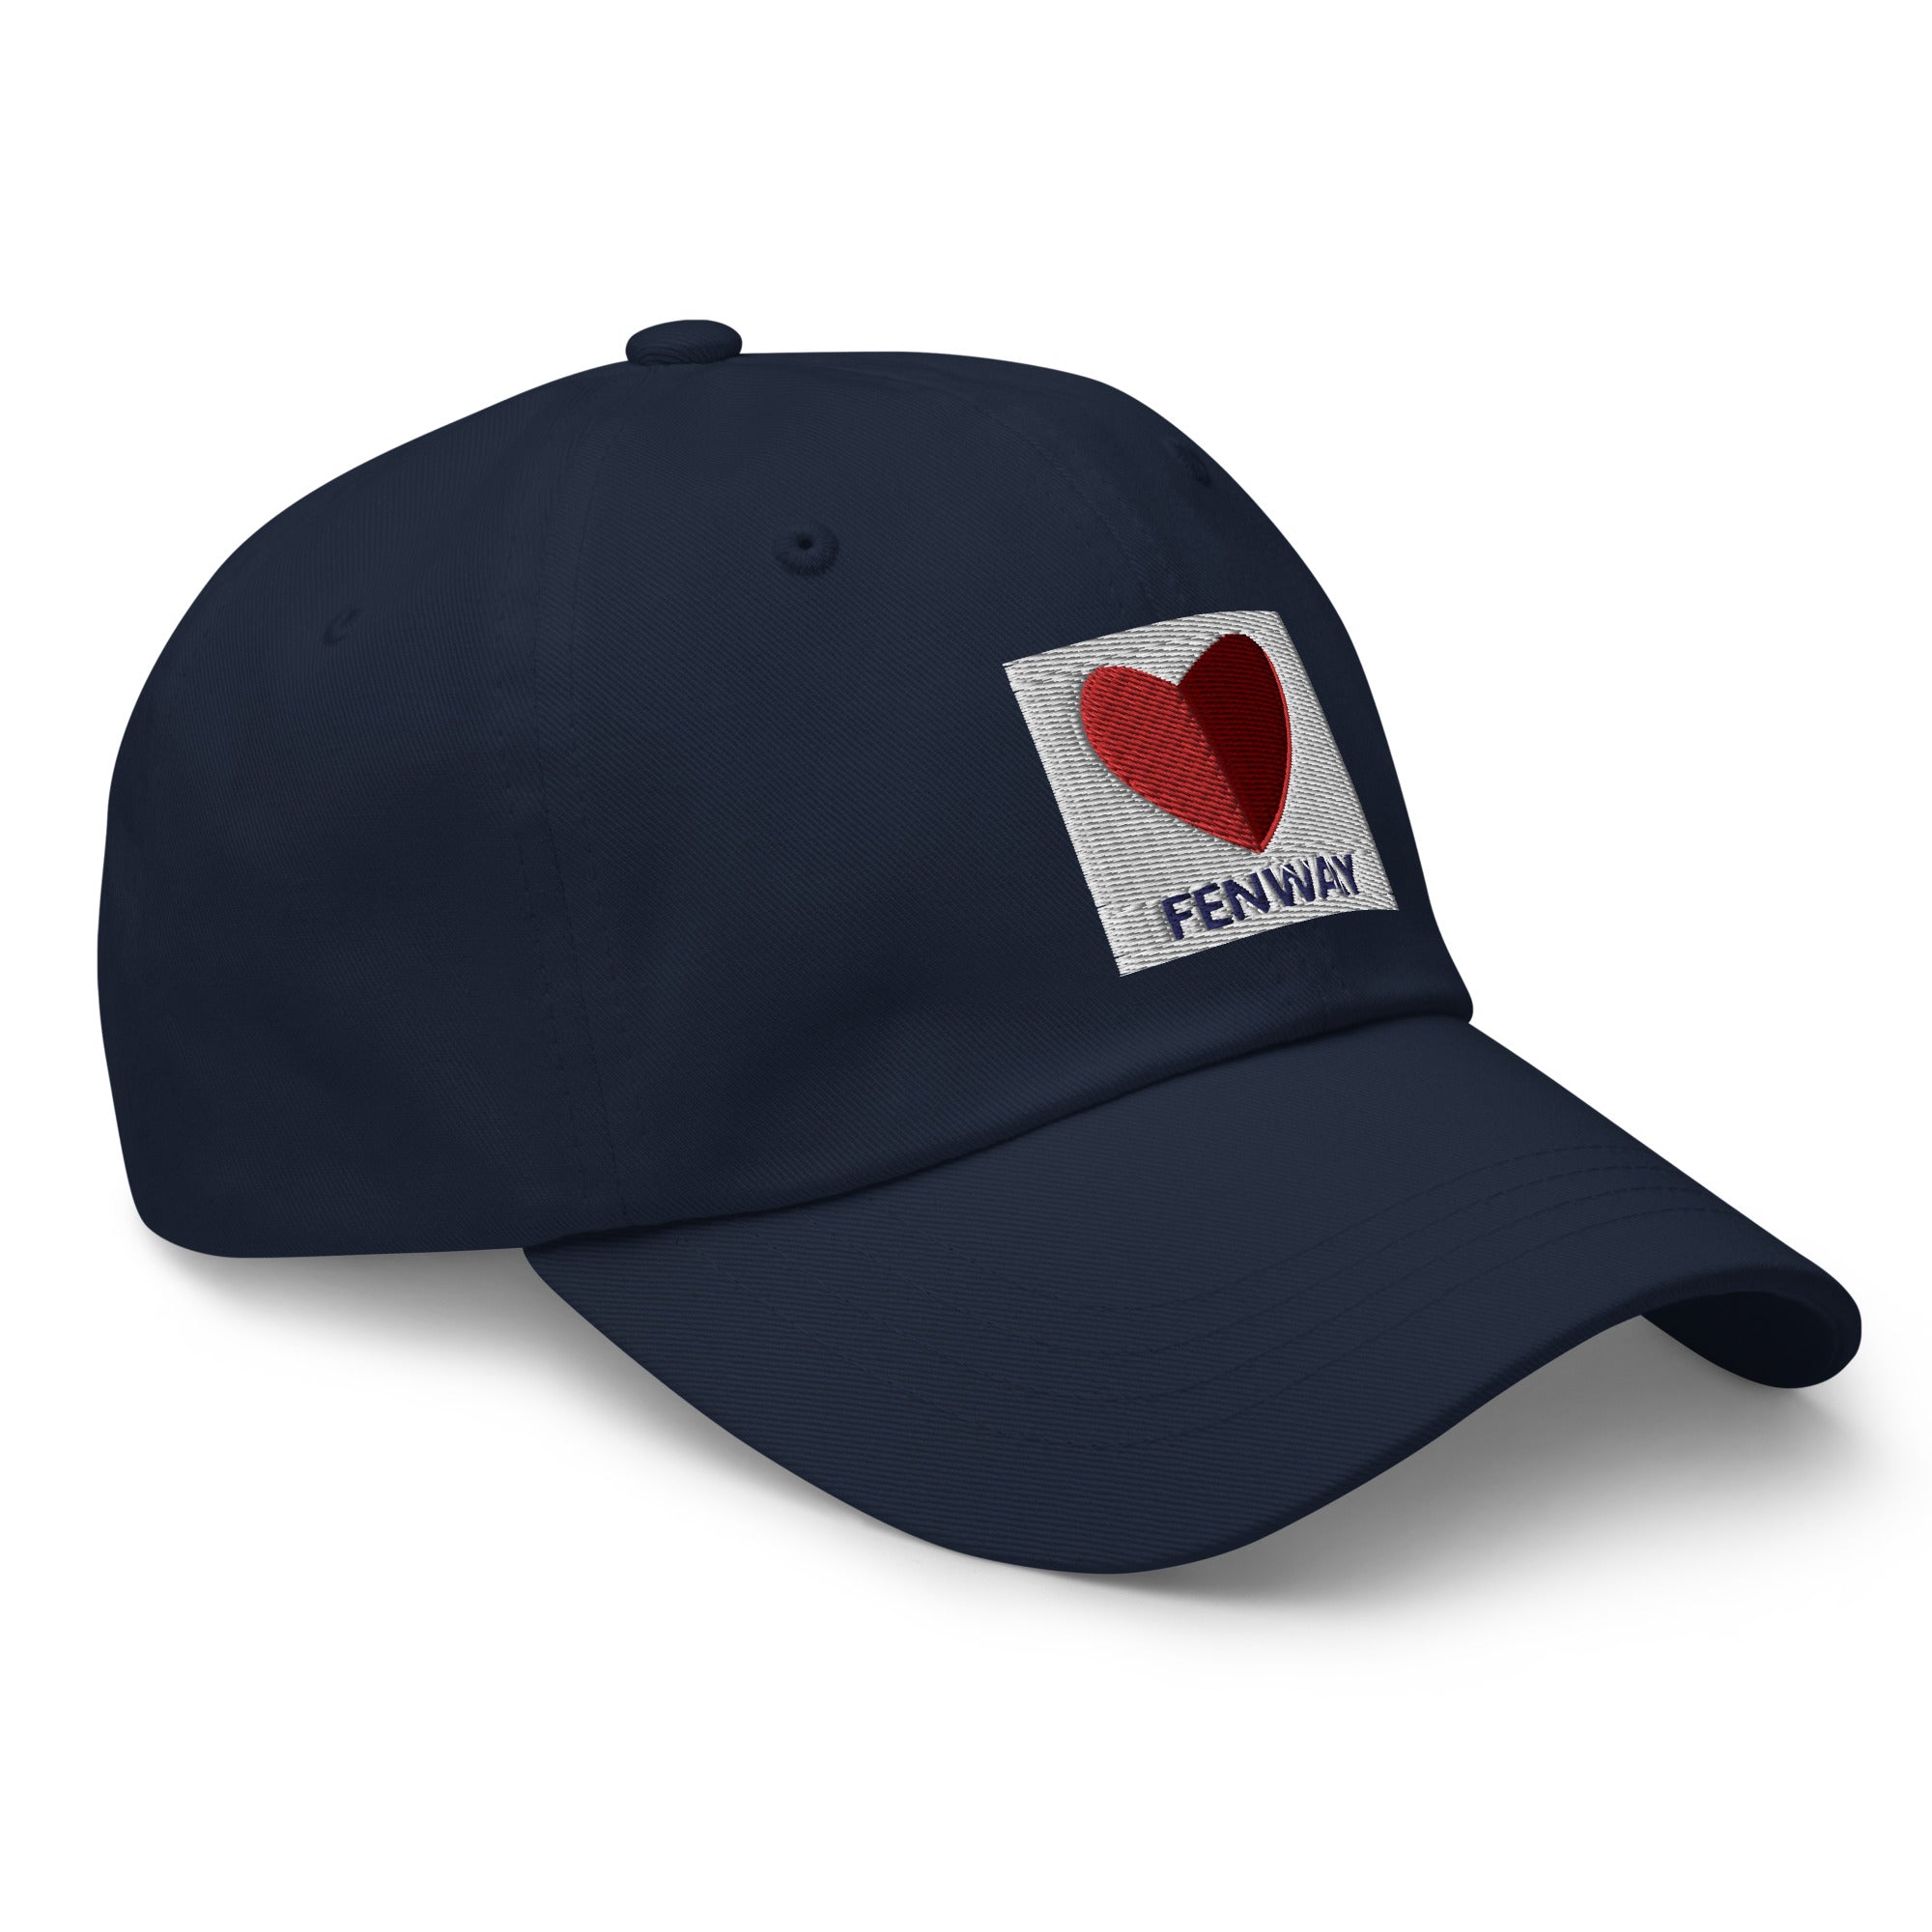 sideview photo of graphic of the citgo sign boston fenway as a heart embroidered on baseball hat